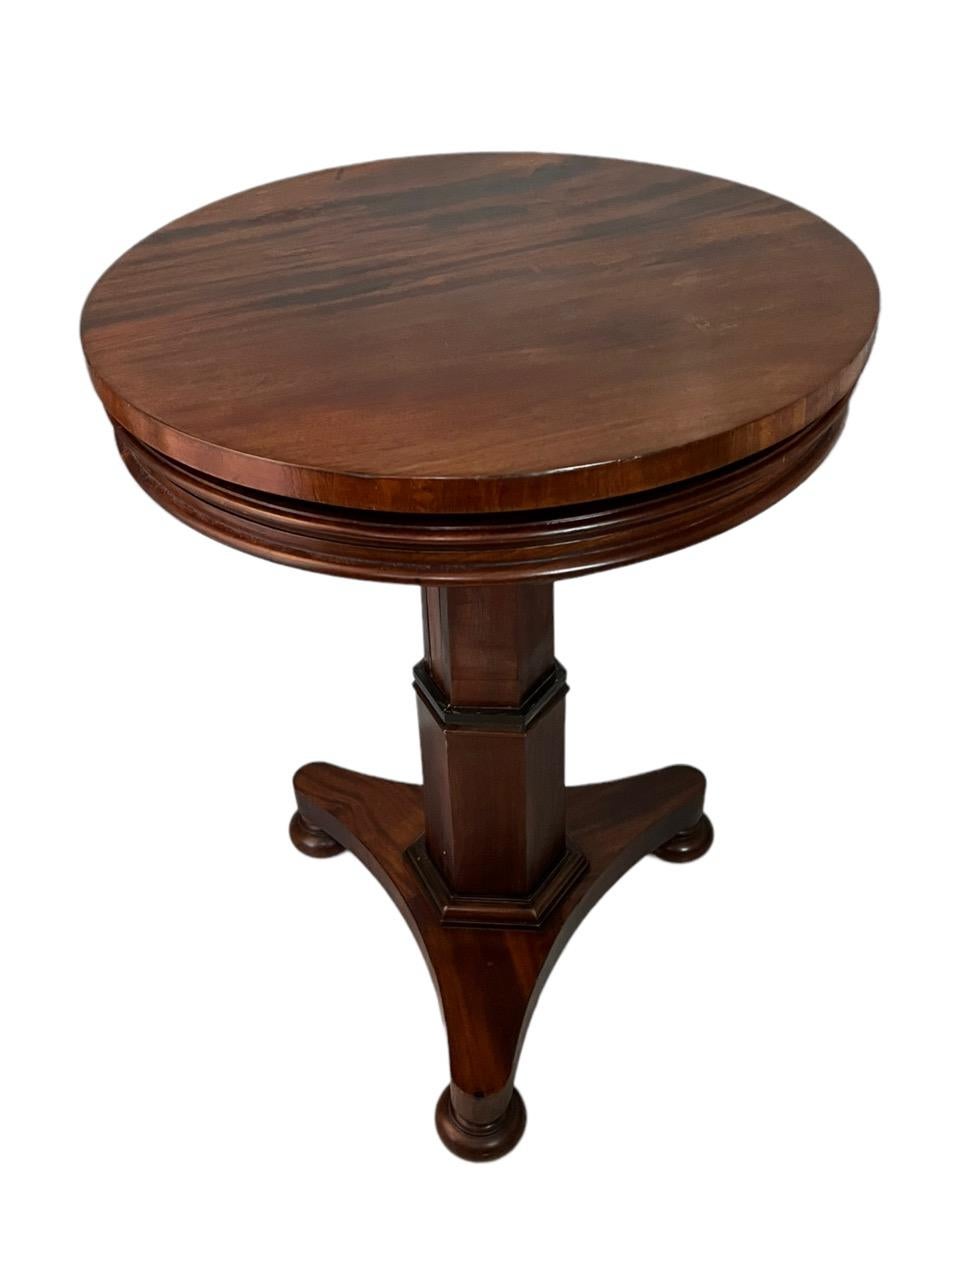 18th Century English Mahogany Expandable Round Three Tier Dumbwaiter Table For Sale 2